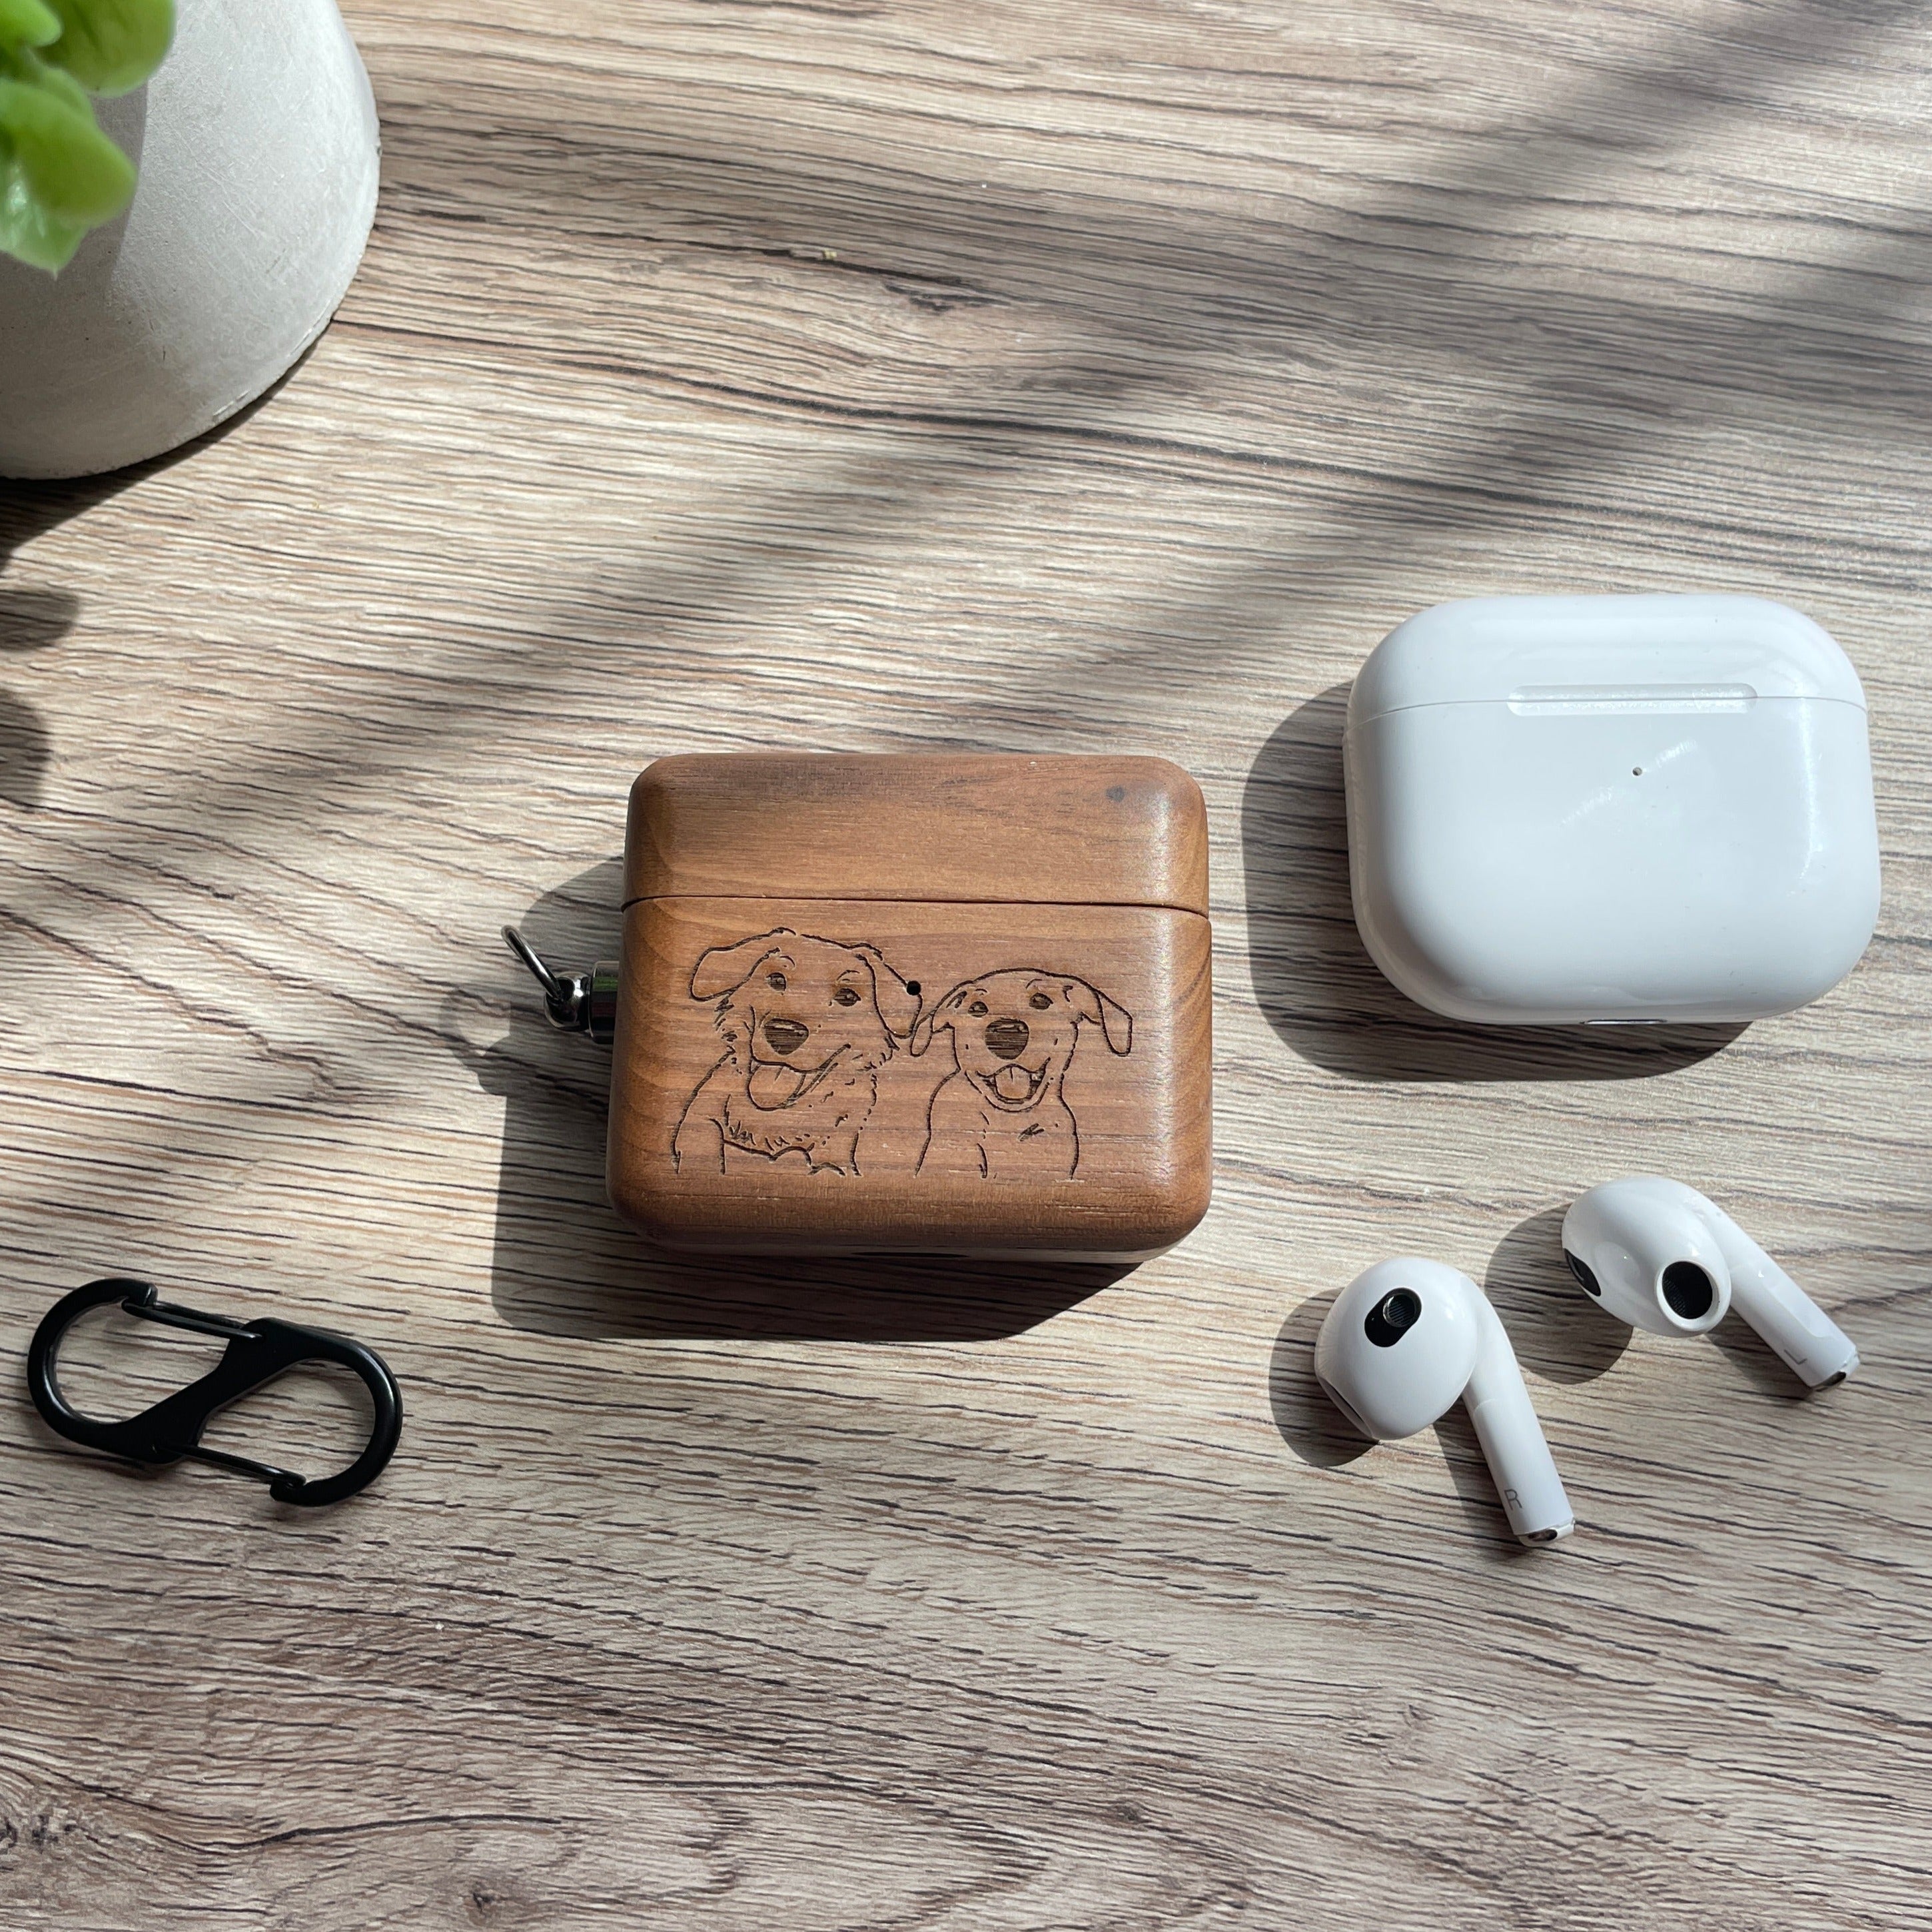 Wood Airpods 3rd Generation Case with photo engraving